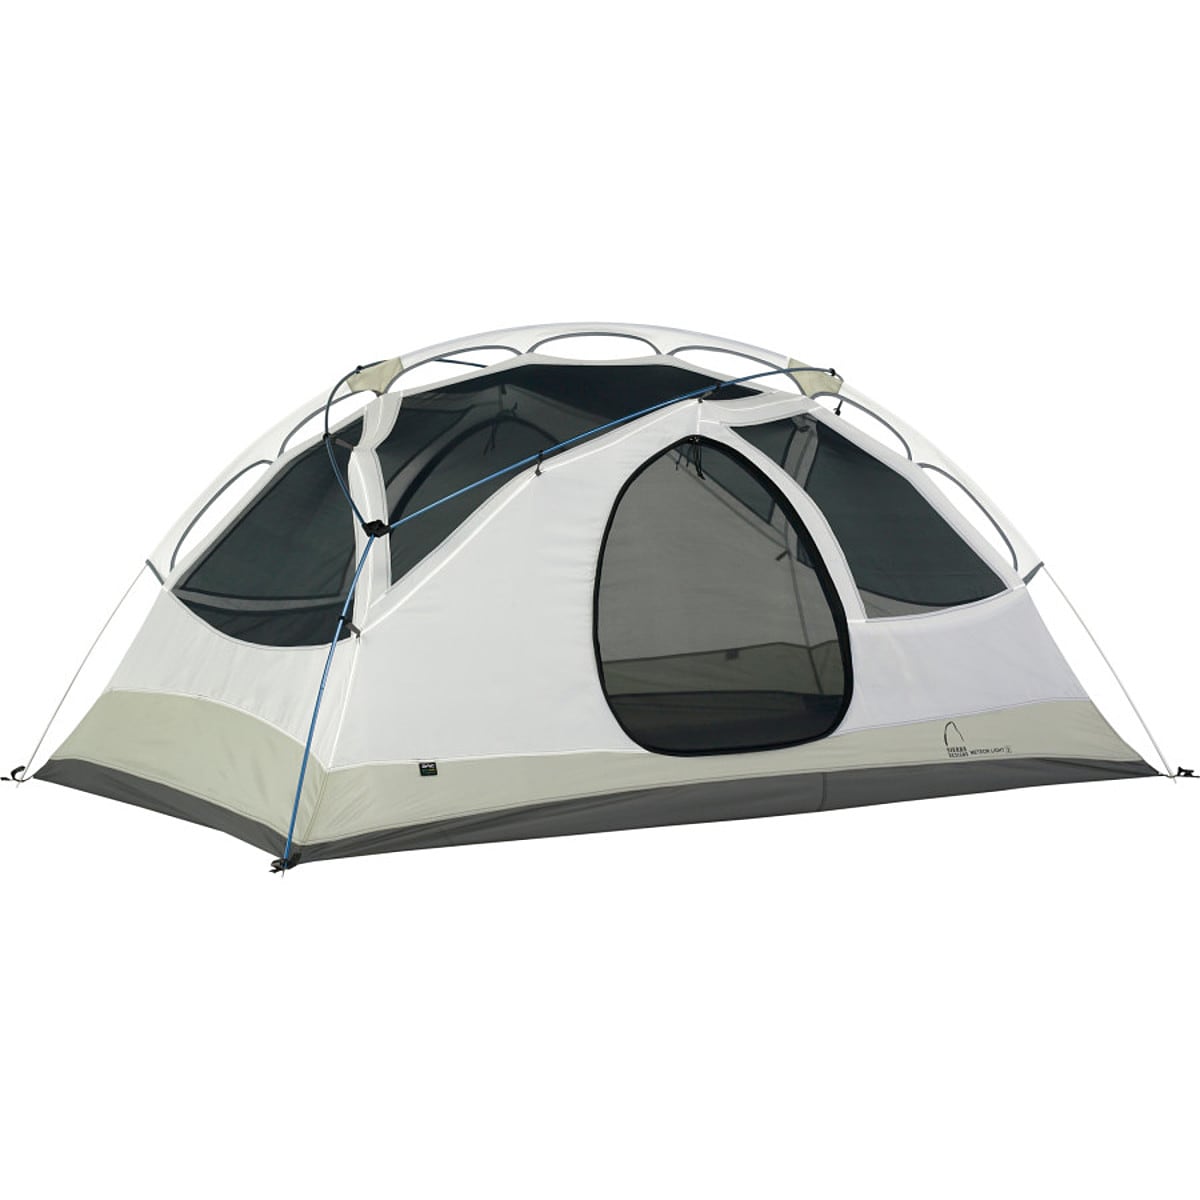 Sierra Designs Meteor Light Tent 2 Person 3 Season Backpacking Camping Tent